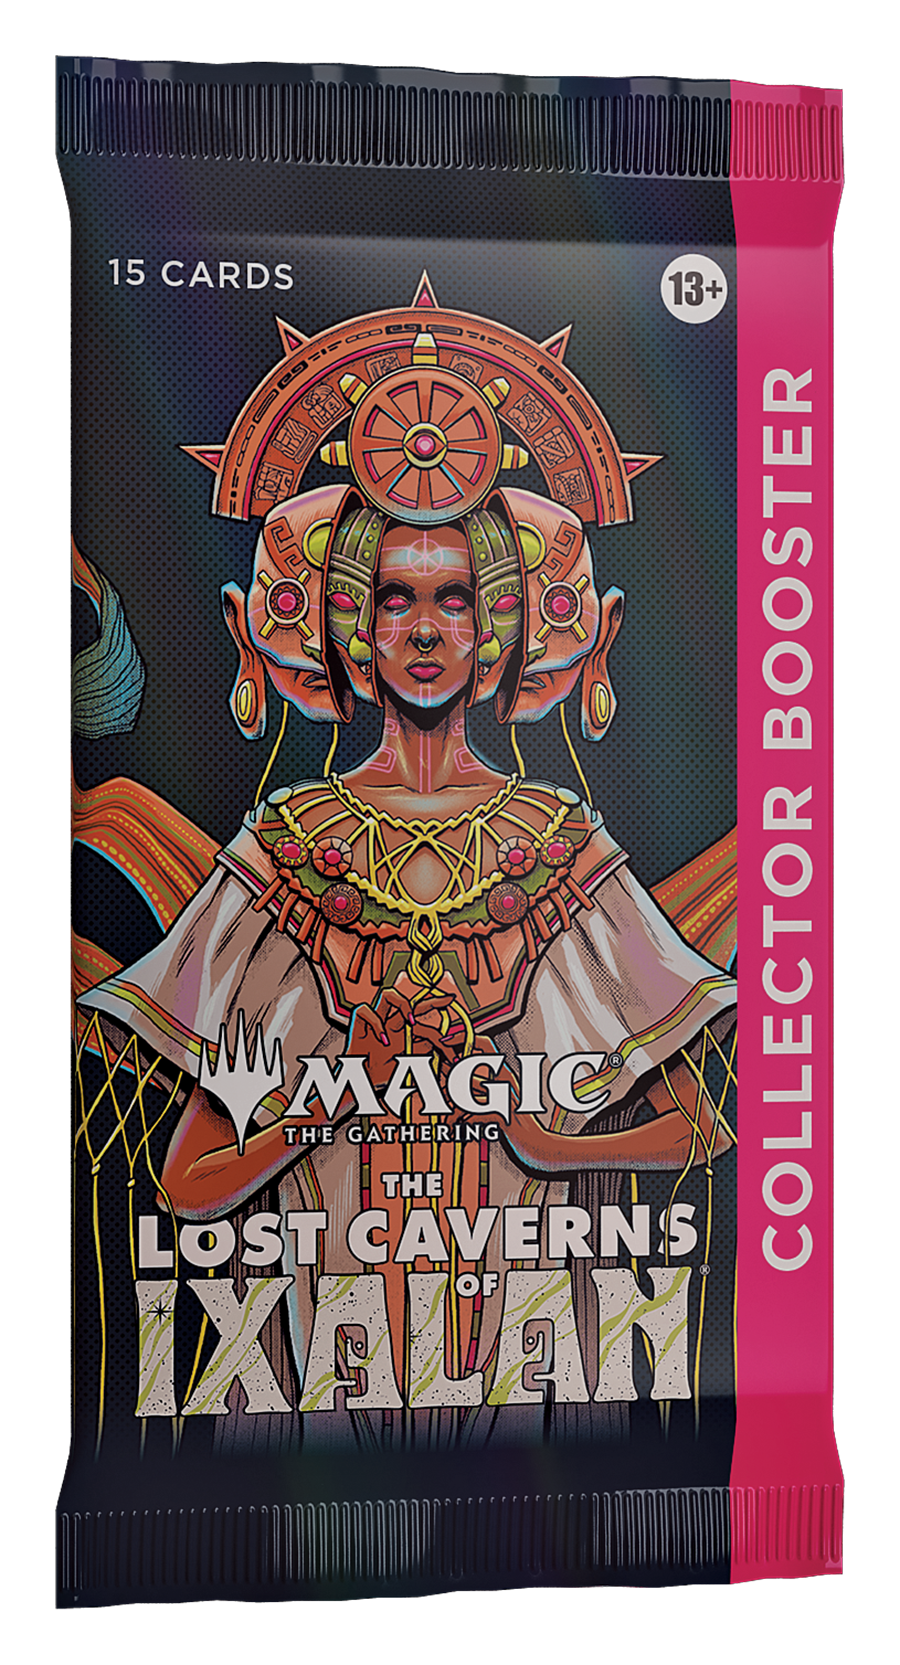 MTG Lost Caverns of Ixalan: 10 best cards in the new Magic: The Gathering  set